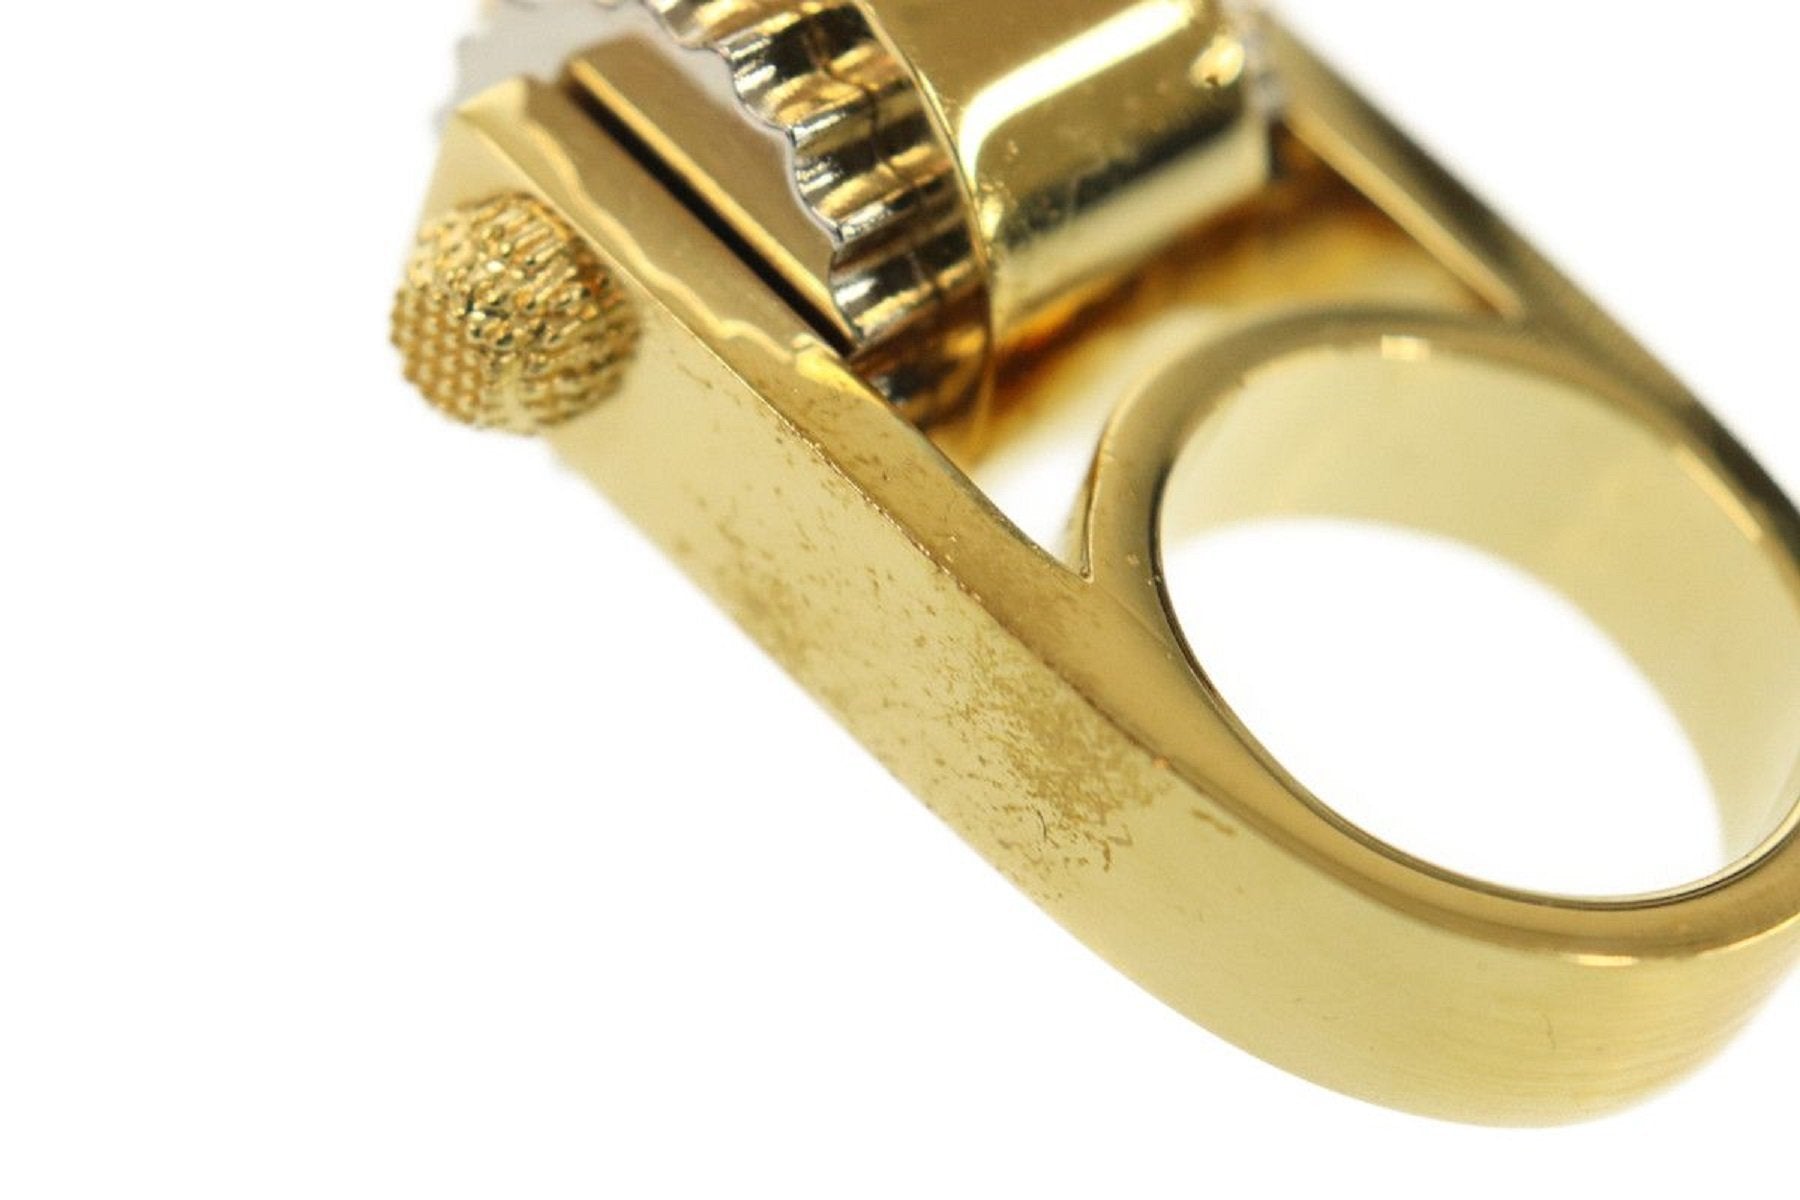 Balenciaga Women's Large Luxury Gold Ring Size: 6 at_Queen_Bee_of_Beverly_Hills